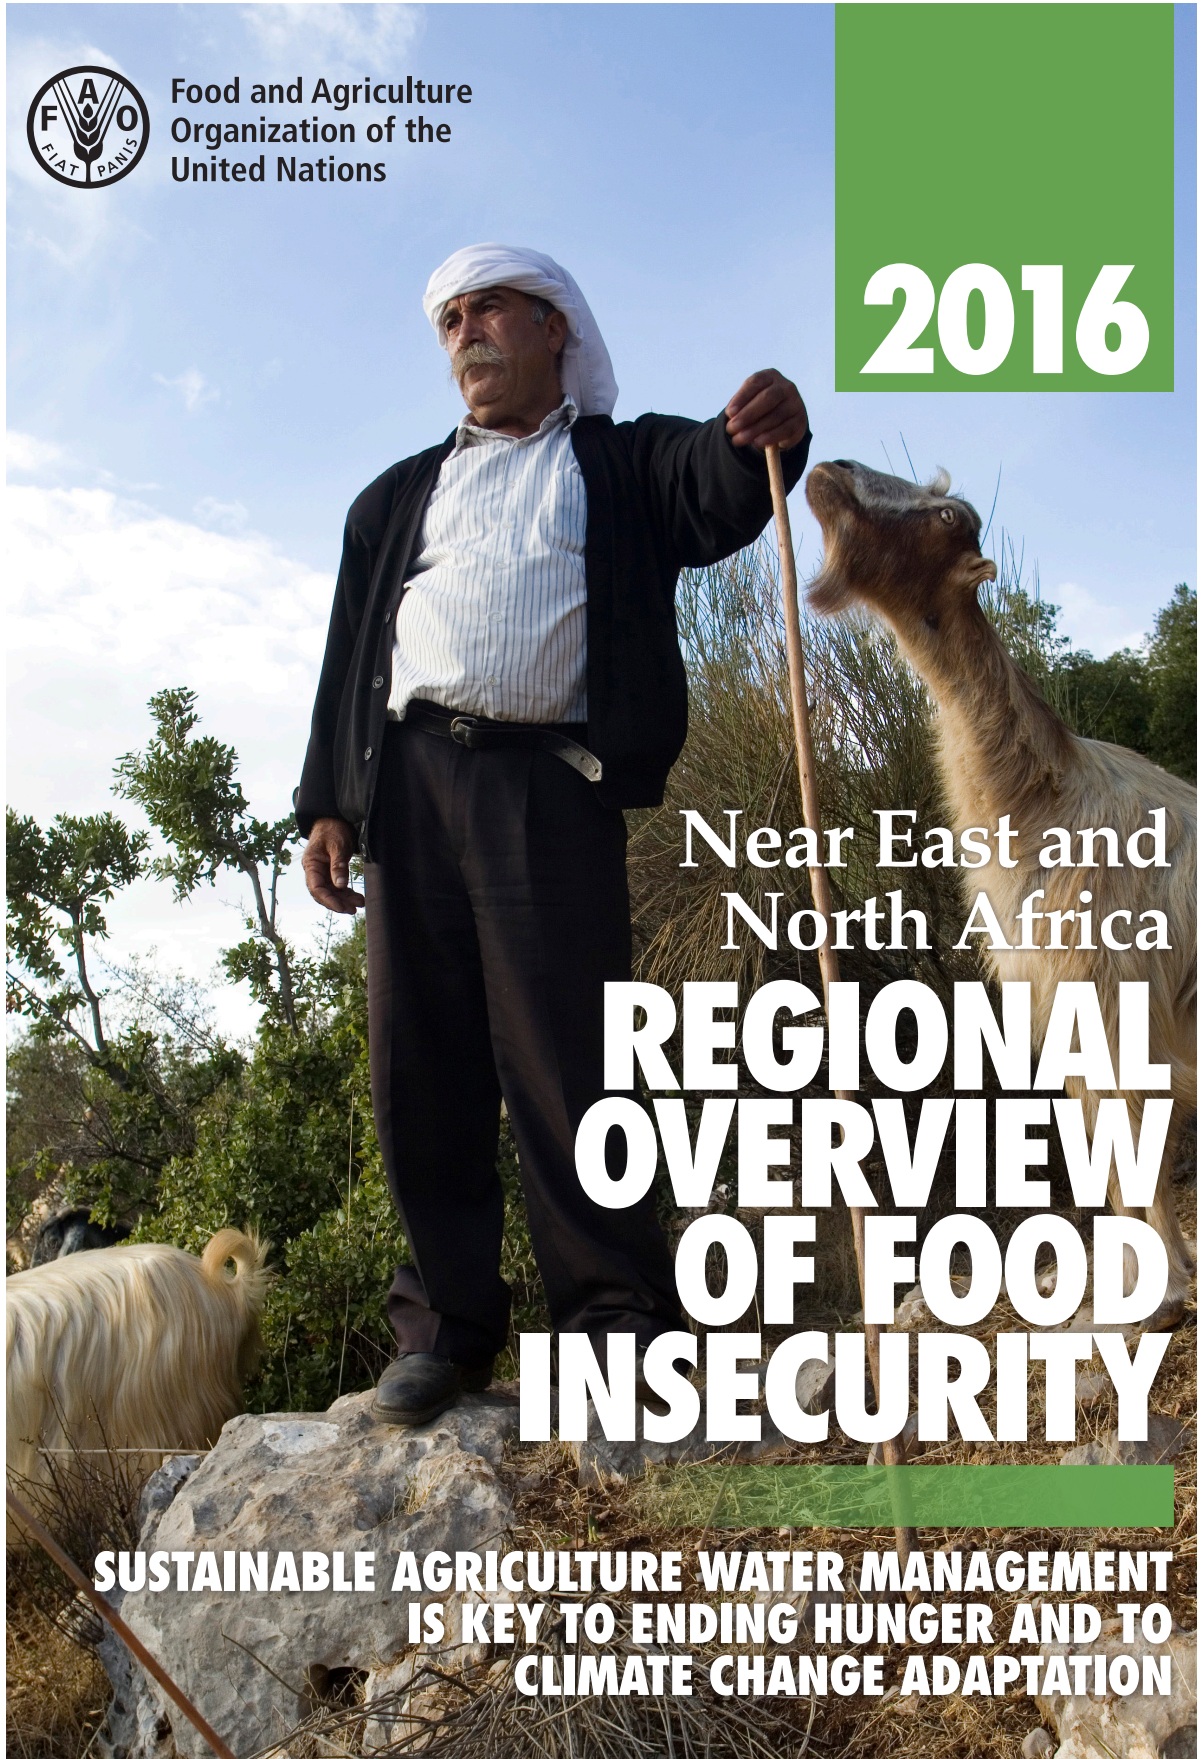 Near east and North Africa regional overview of food insecurity 2016: Sustainable agriculture water management is key to ending hunger and to climate change adaptation